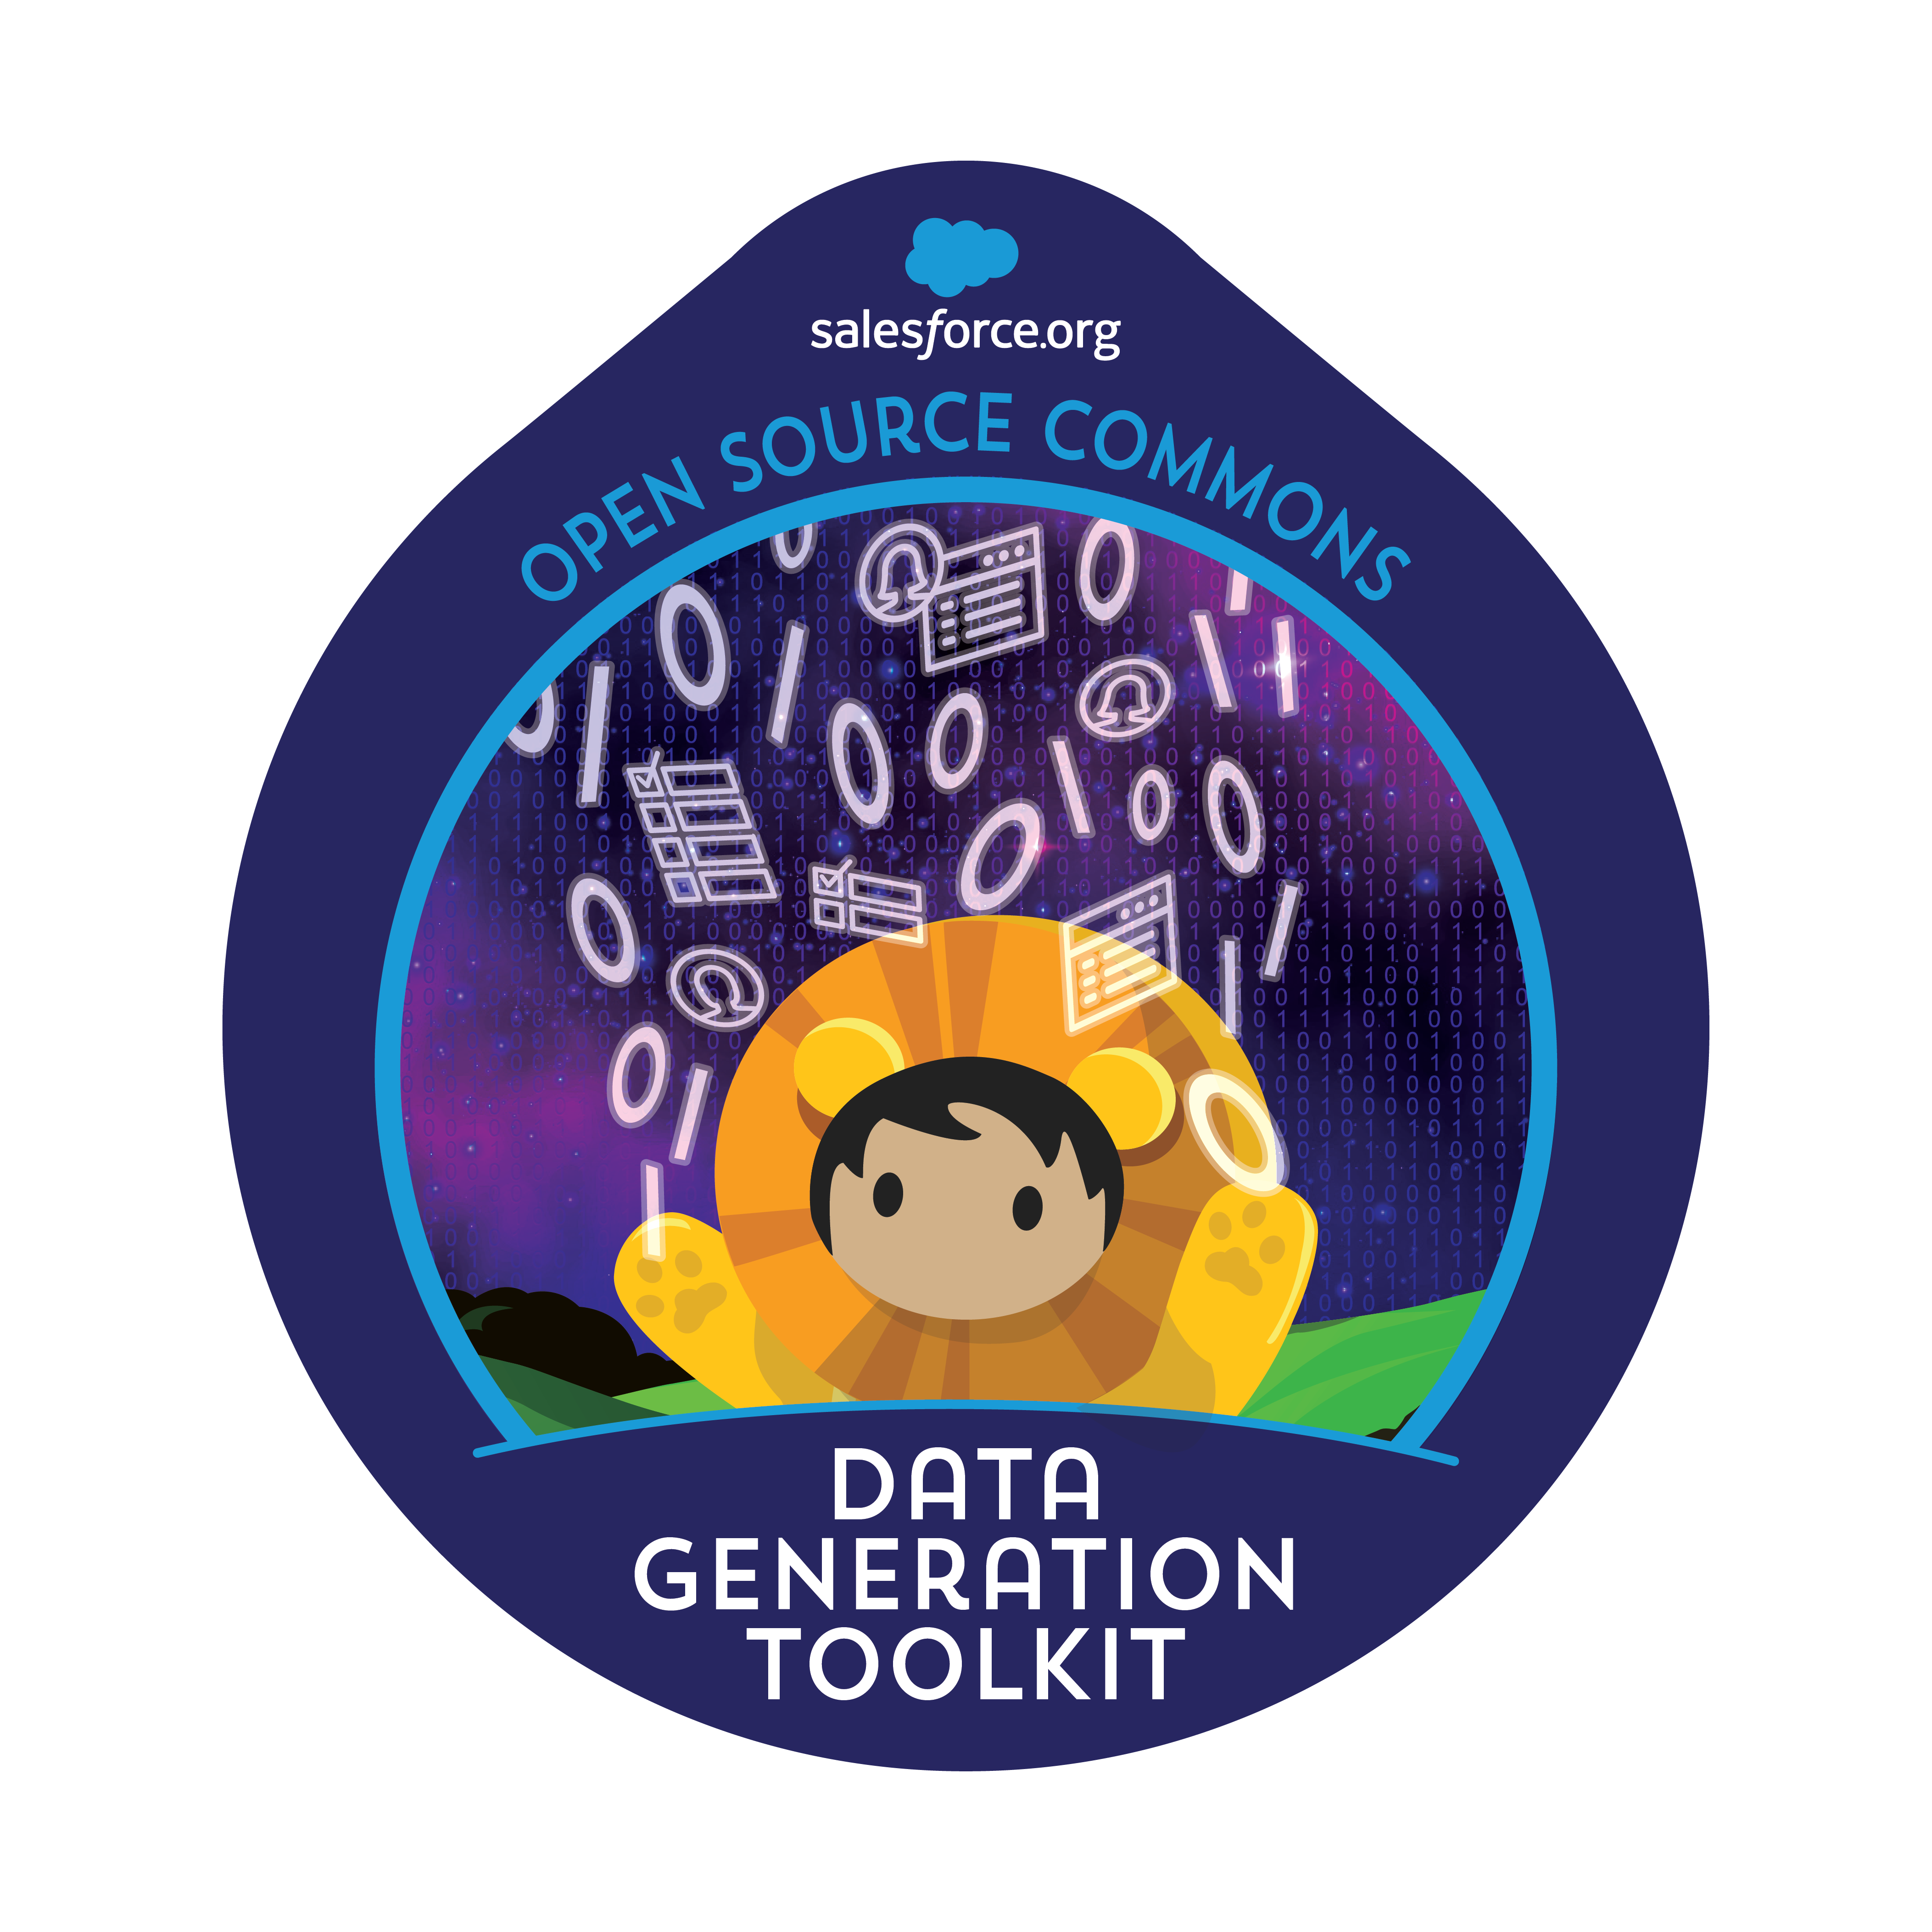 Data Generation Toolkit Logo featuring Astro in a rain of data